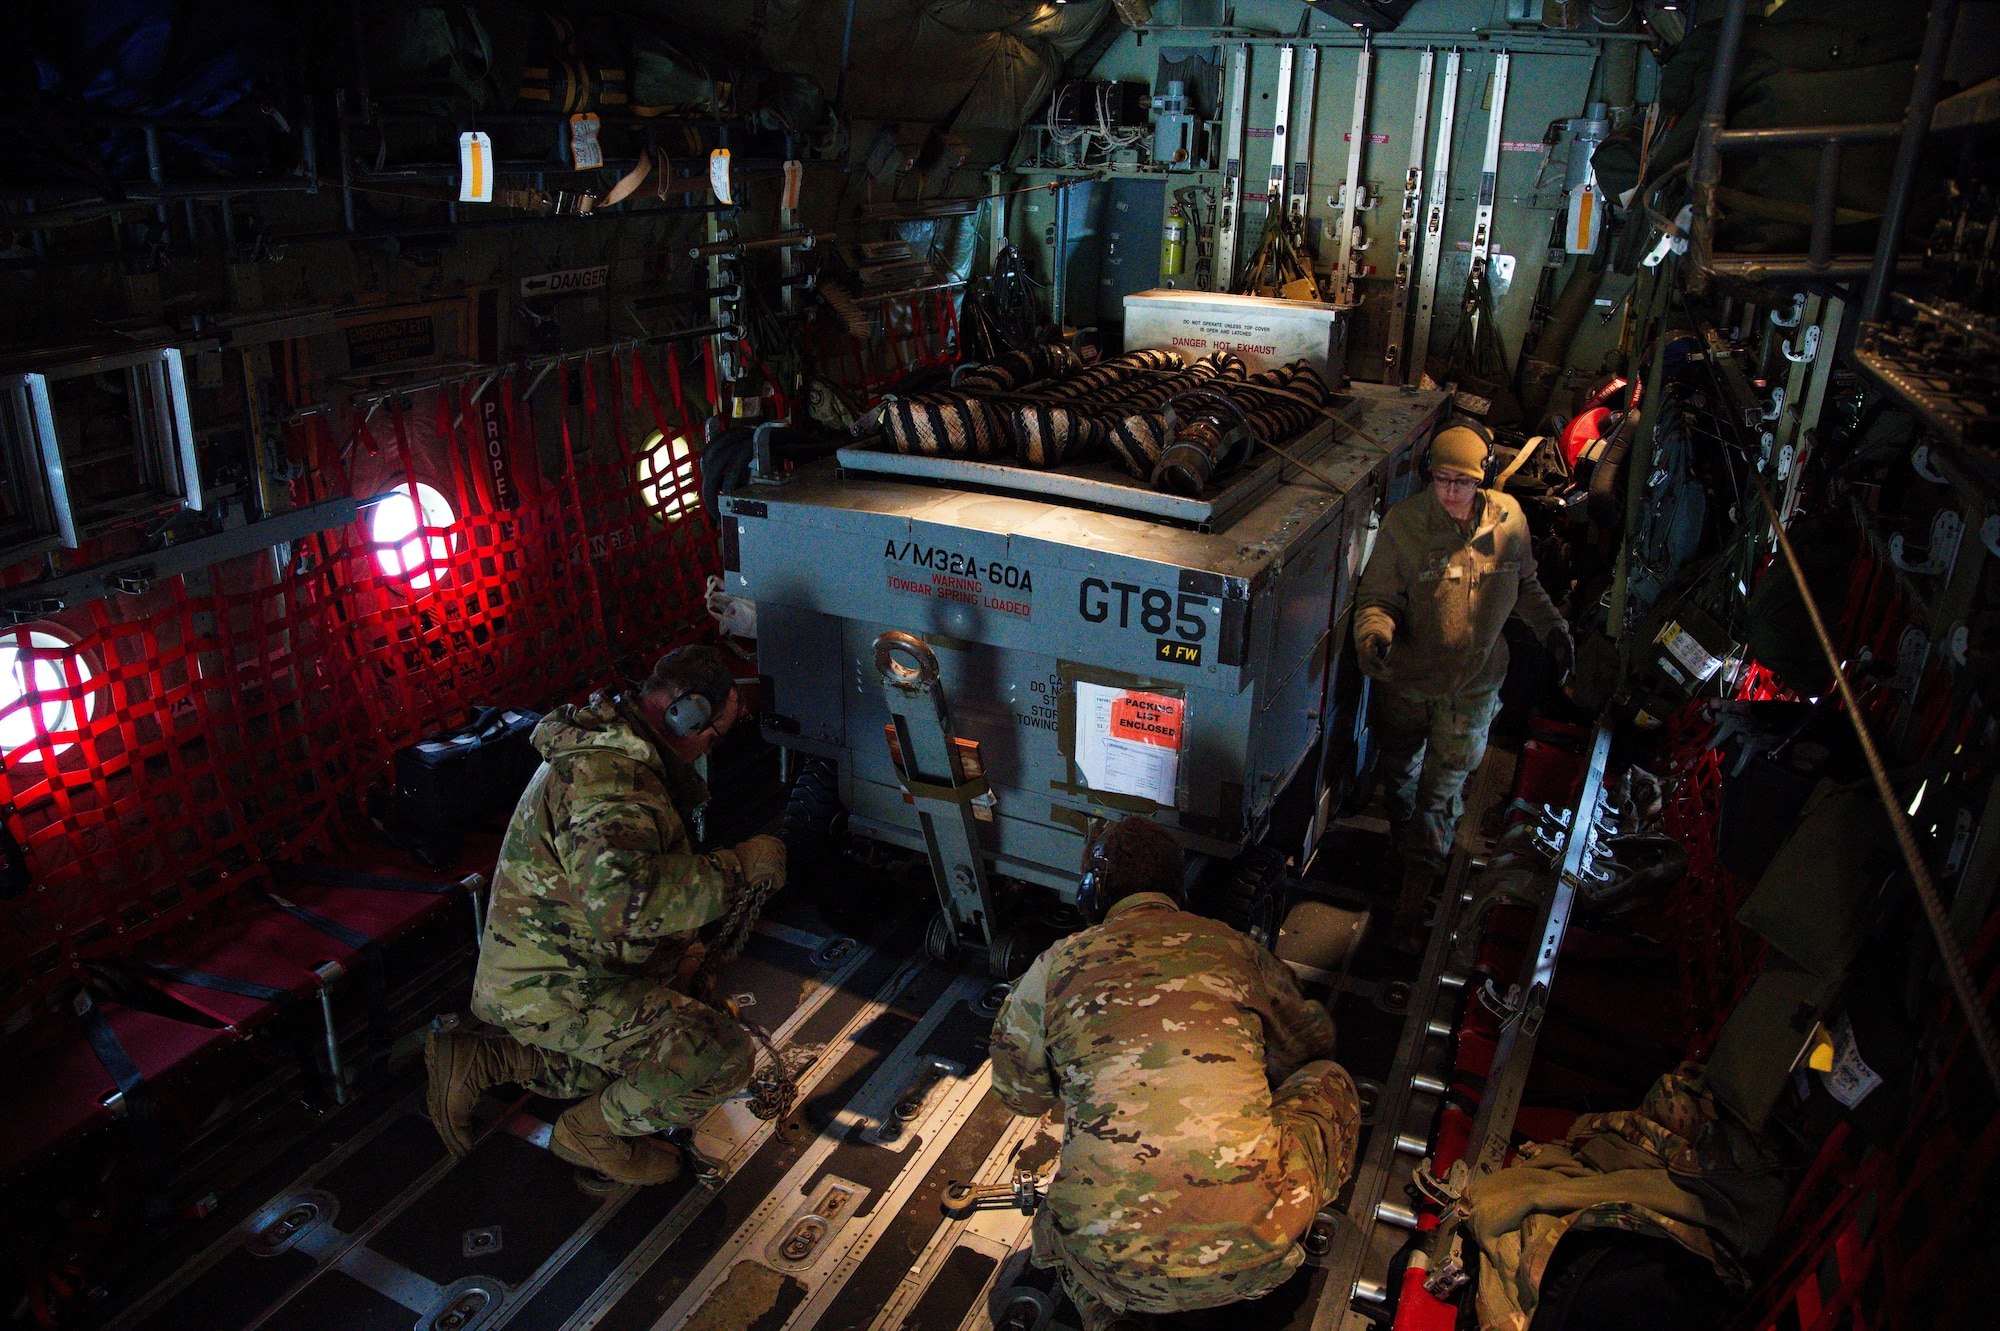 U.S. Air Force Airmen from the 435th Contingency Response Squadron secure a load to a C-130J Super Hercules during Operation Castle Forge at Larissa Air Base, Greece, Oct. 15, 2021. The 435 CRS is a scalable, cross-functional, rapidly deployable force designed to assess and open air bases, and perform initial airfield operations enabling the rapid standup of combat operations. Castle Forge is a U.S. Air Forces Europe-Air Forces Africa-led joint, multinational training event. It provides a dynamic, partnership-focused training environment that raises the U.S. commitment to collective defense in the Black Sea region while enhancing interoperability alongside NATO allies. (U.S. Air Force photo by Senior Airman Branden Rae)